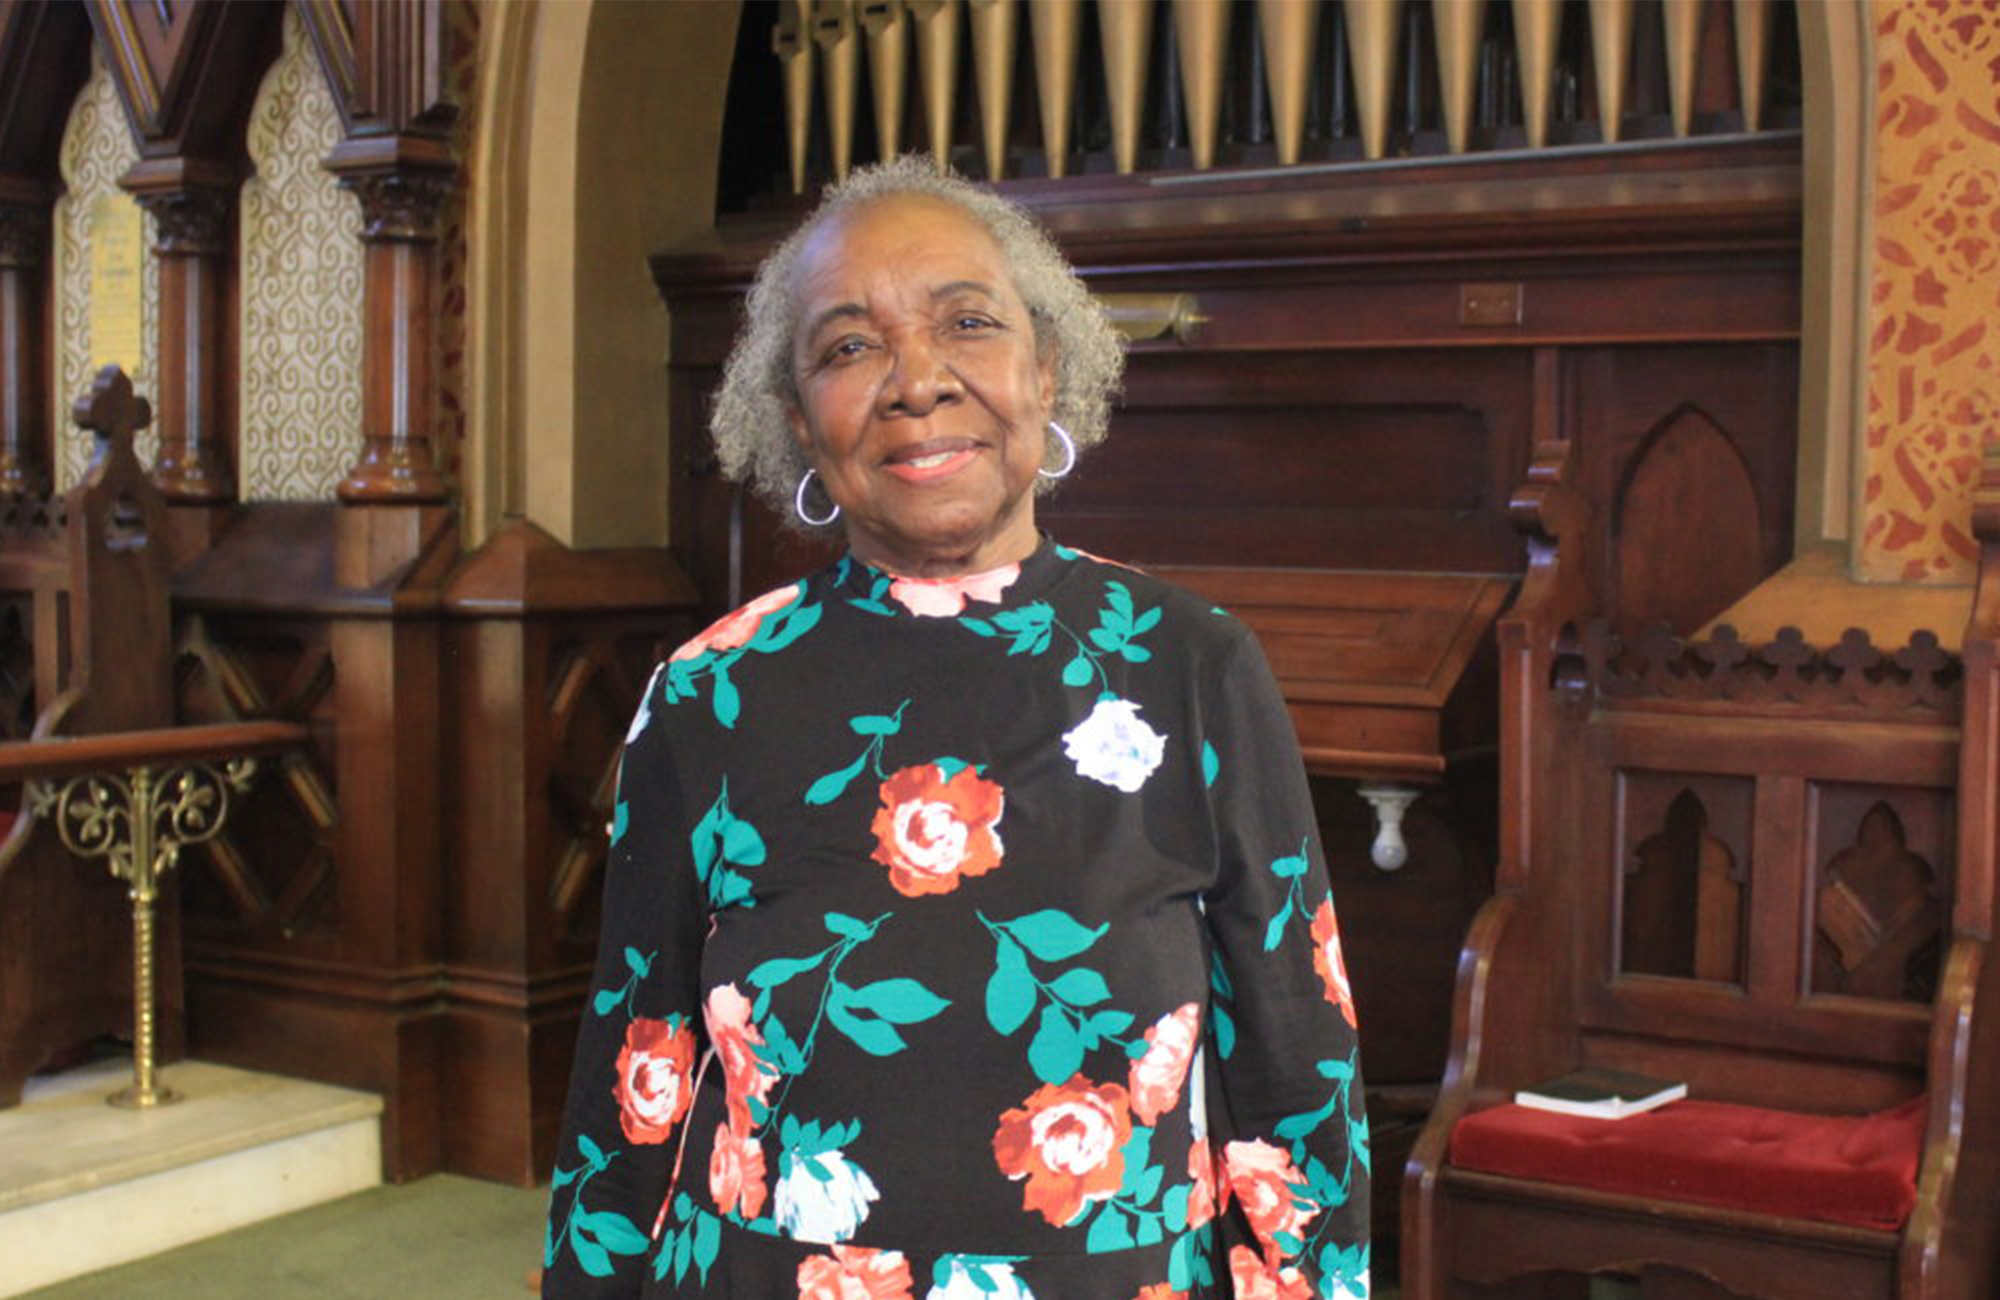 Image of Dr. Joan Hillsman in front of church organ pipes